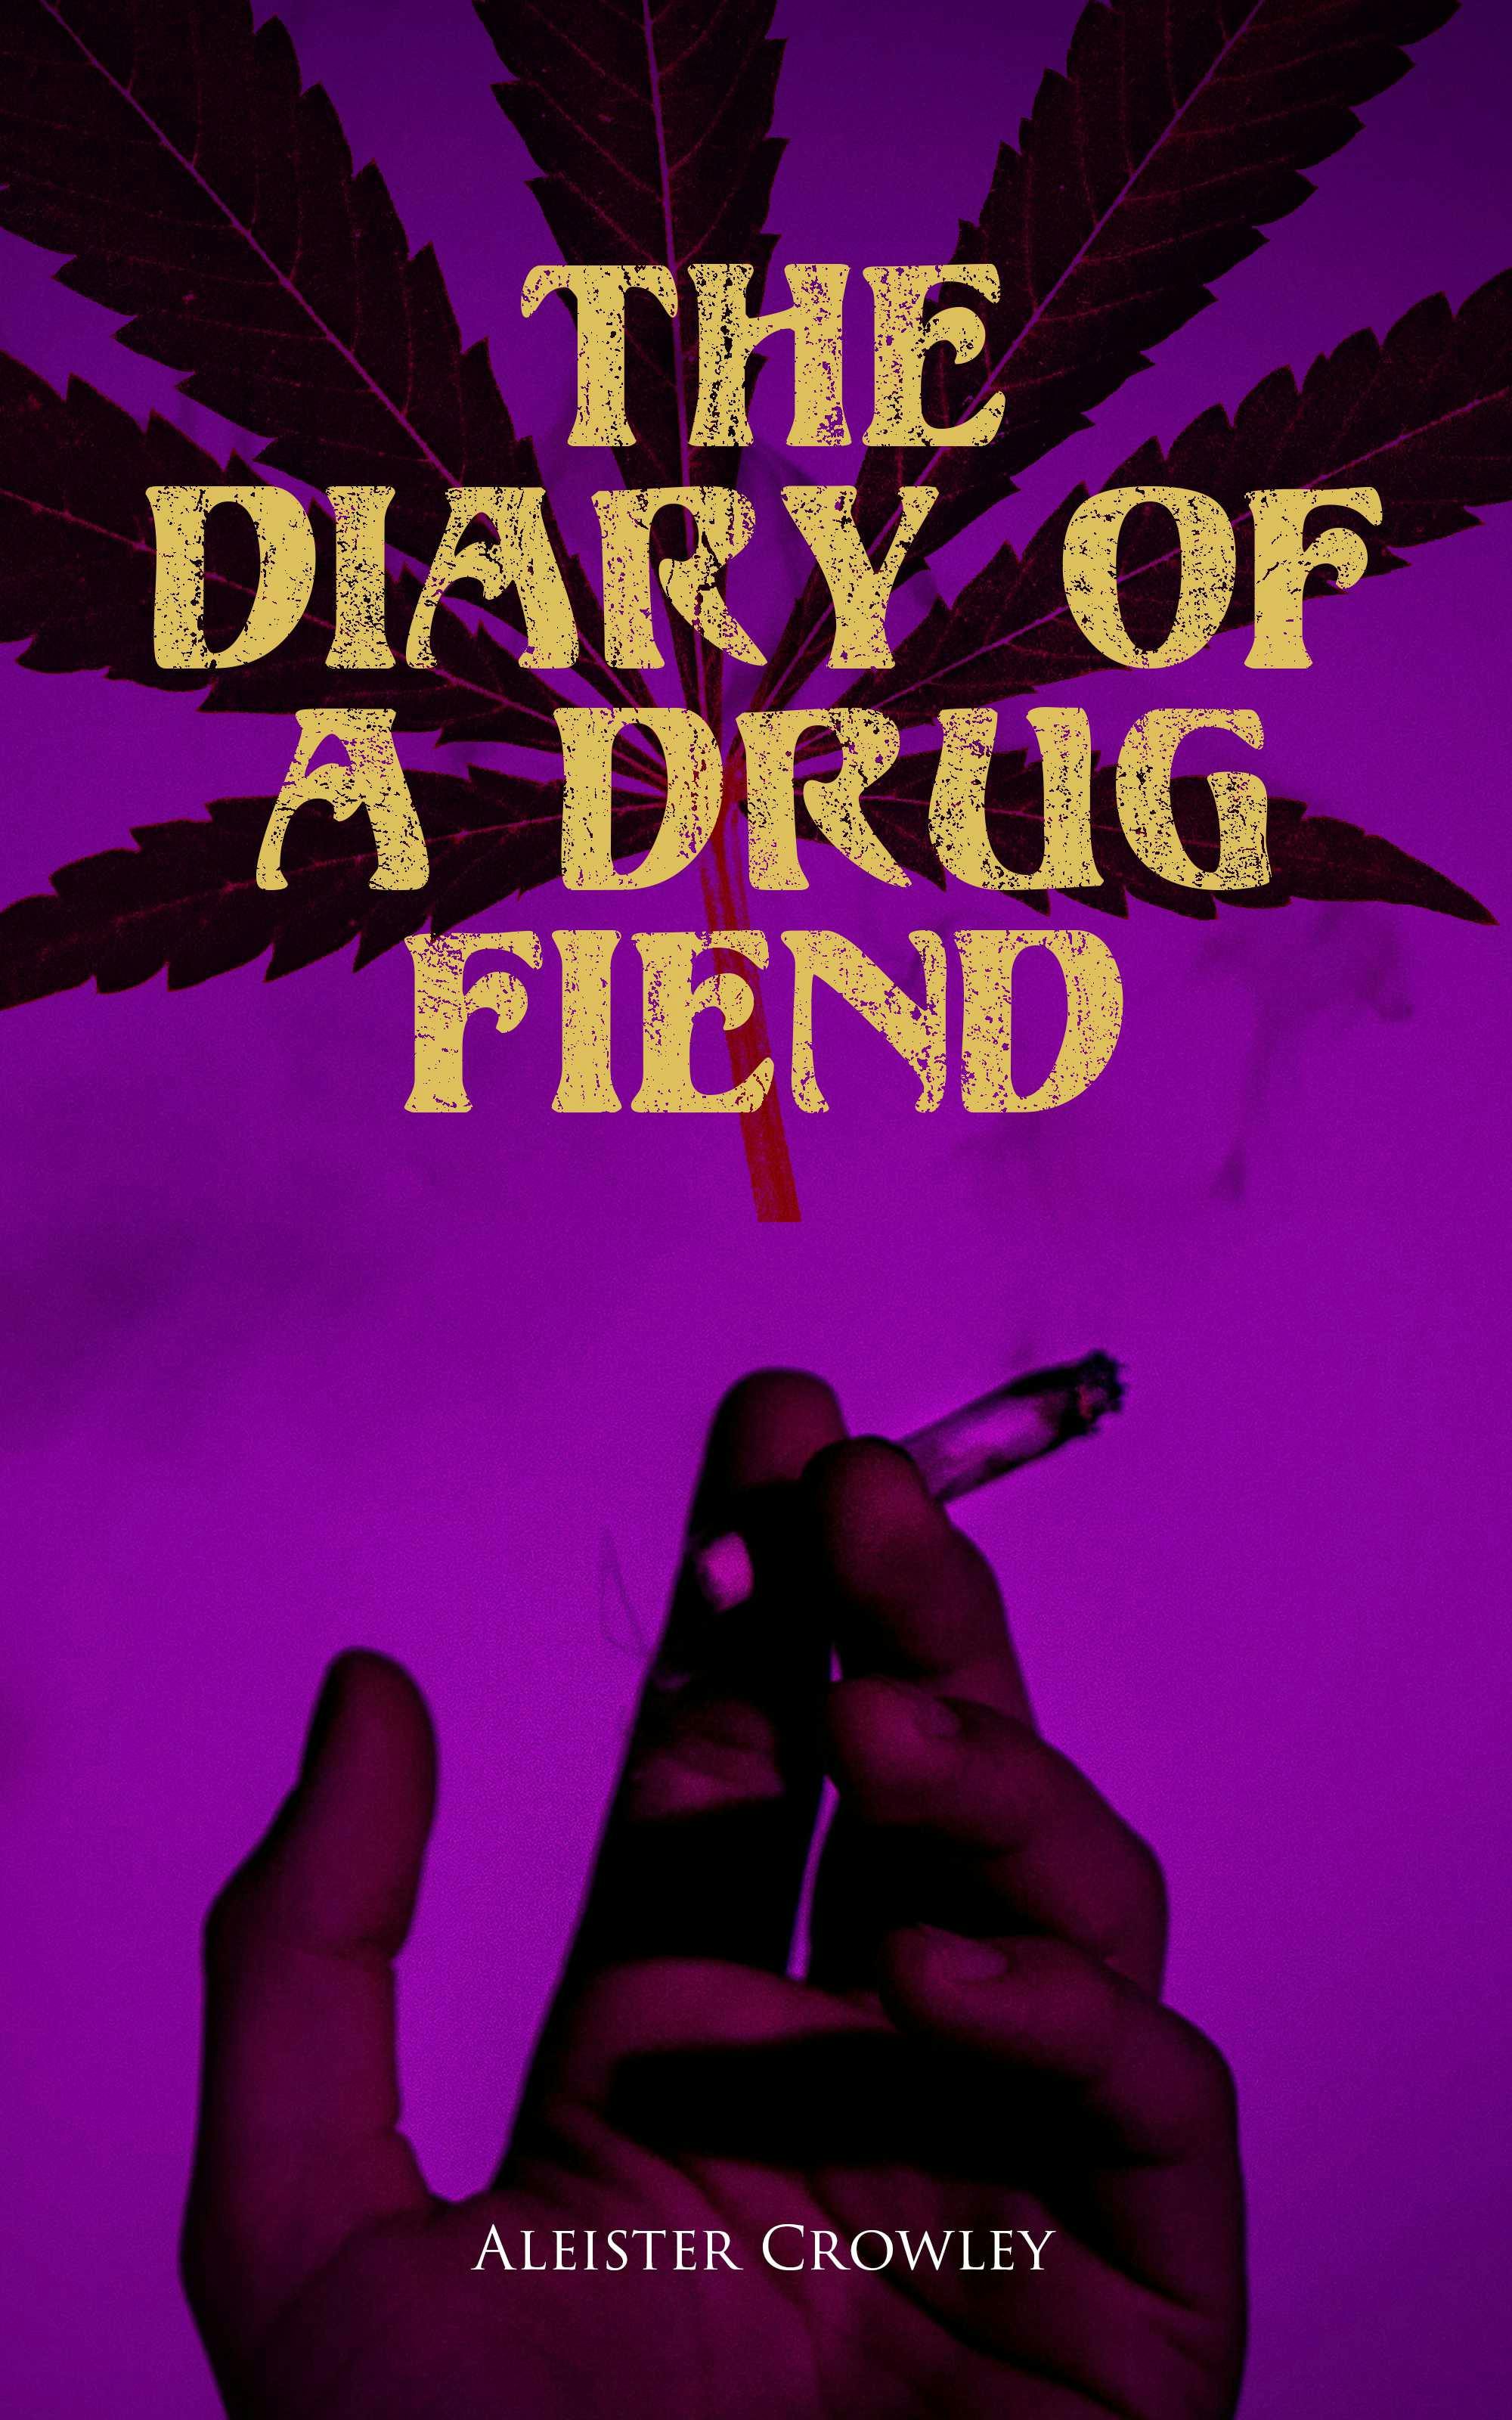 The Diary of a Drug Fiend - Aleister Crowley